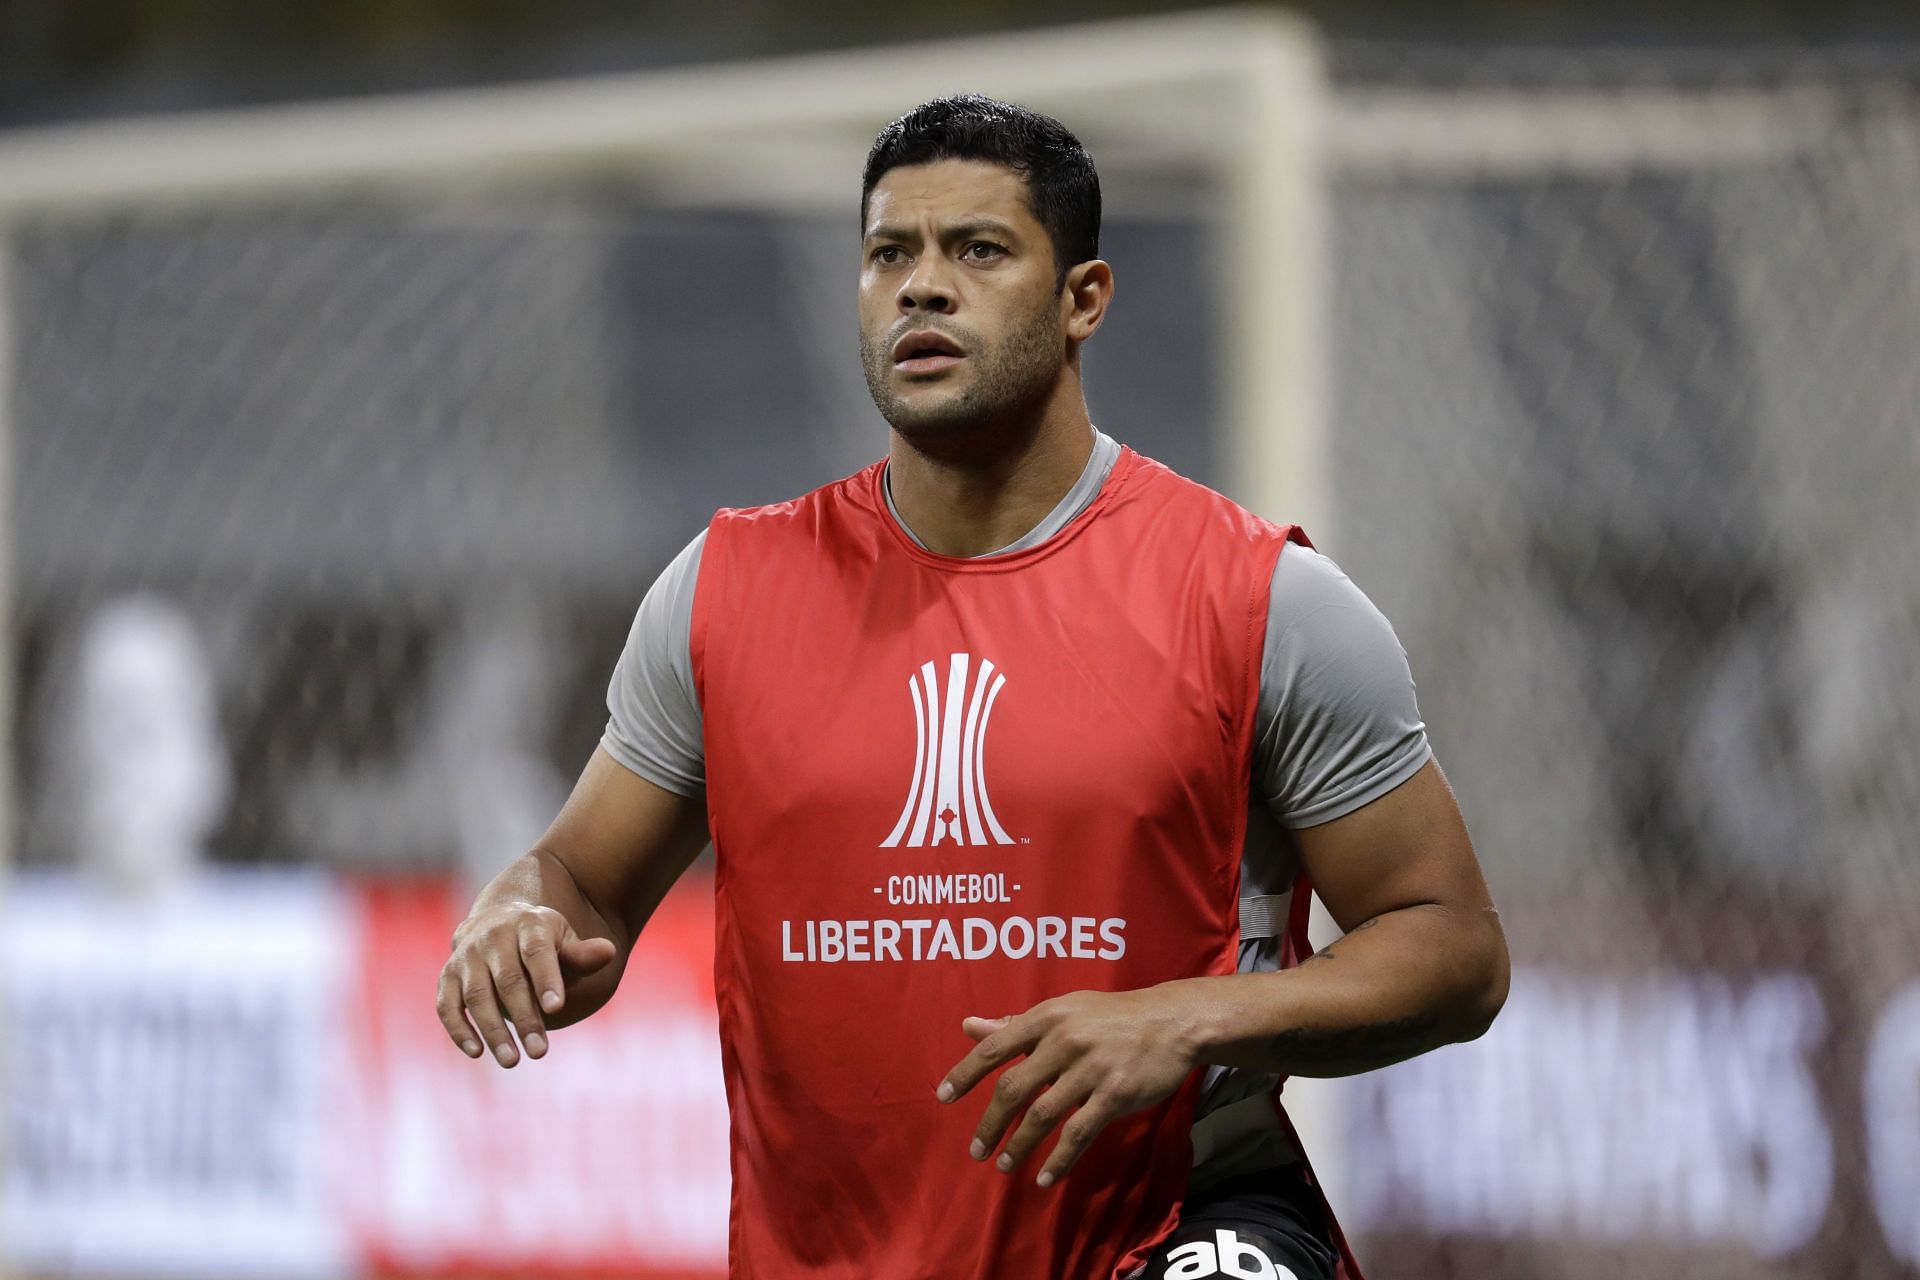 Hulk has scored 24 goals in 53 appearances for his current club Atletico Mineiro in 2021